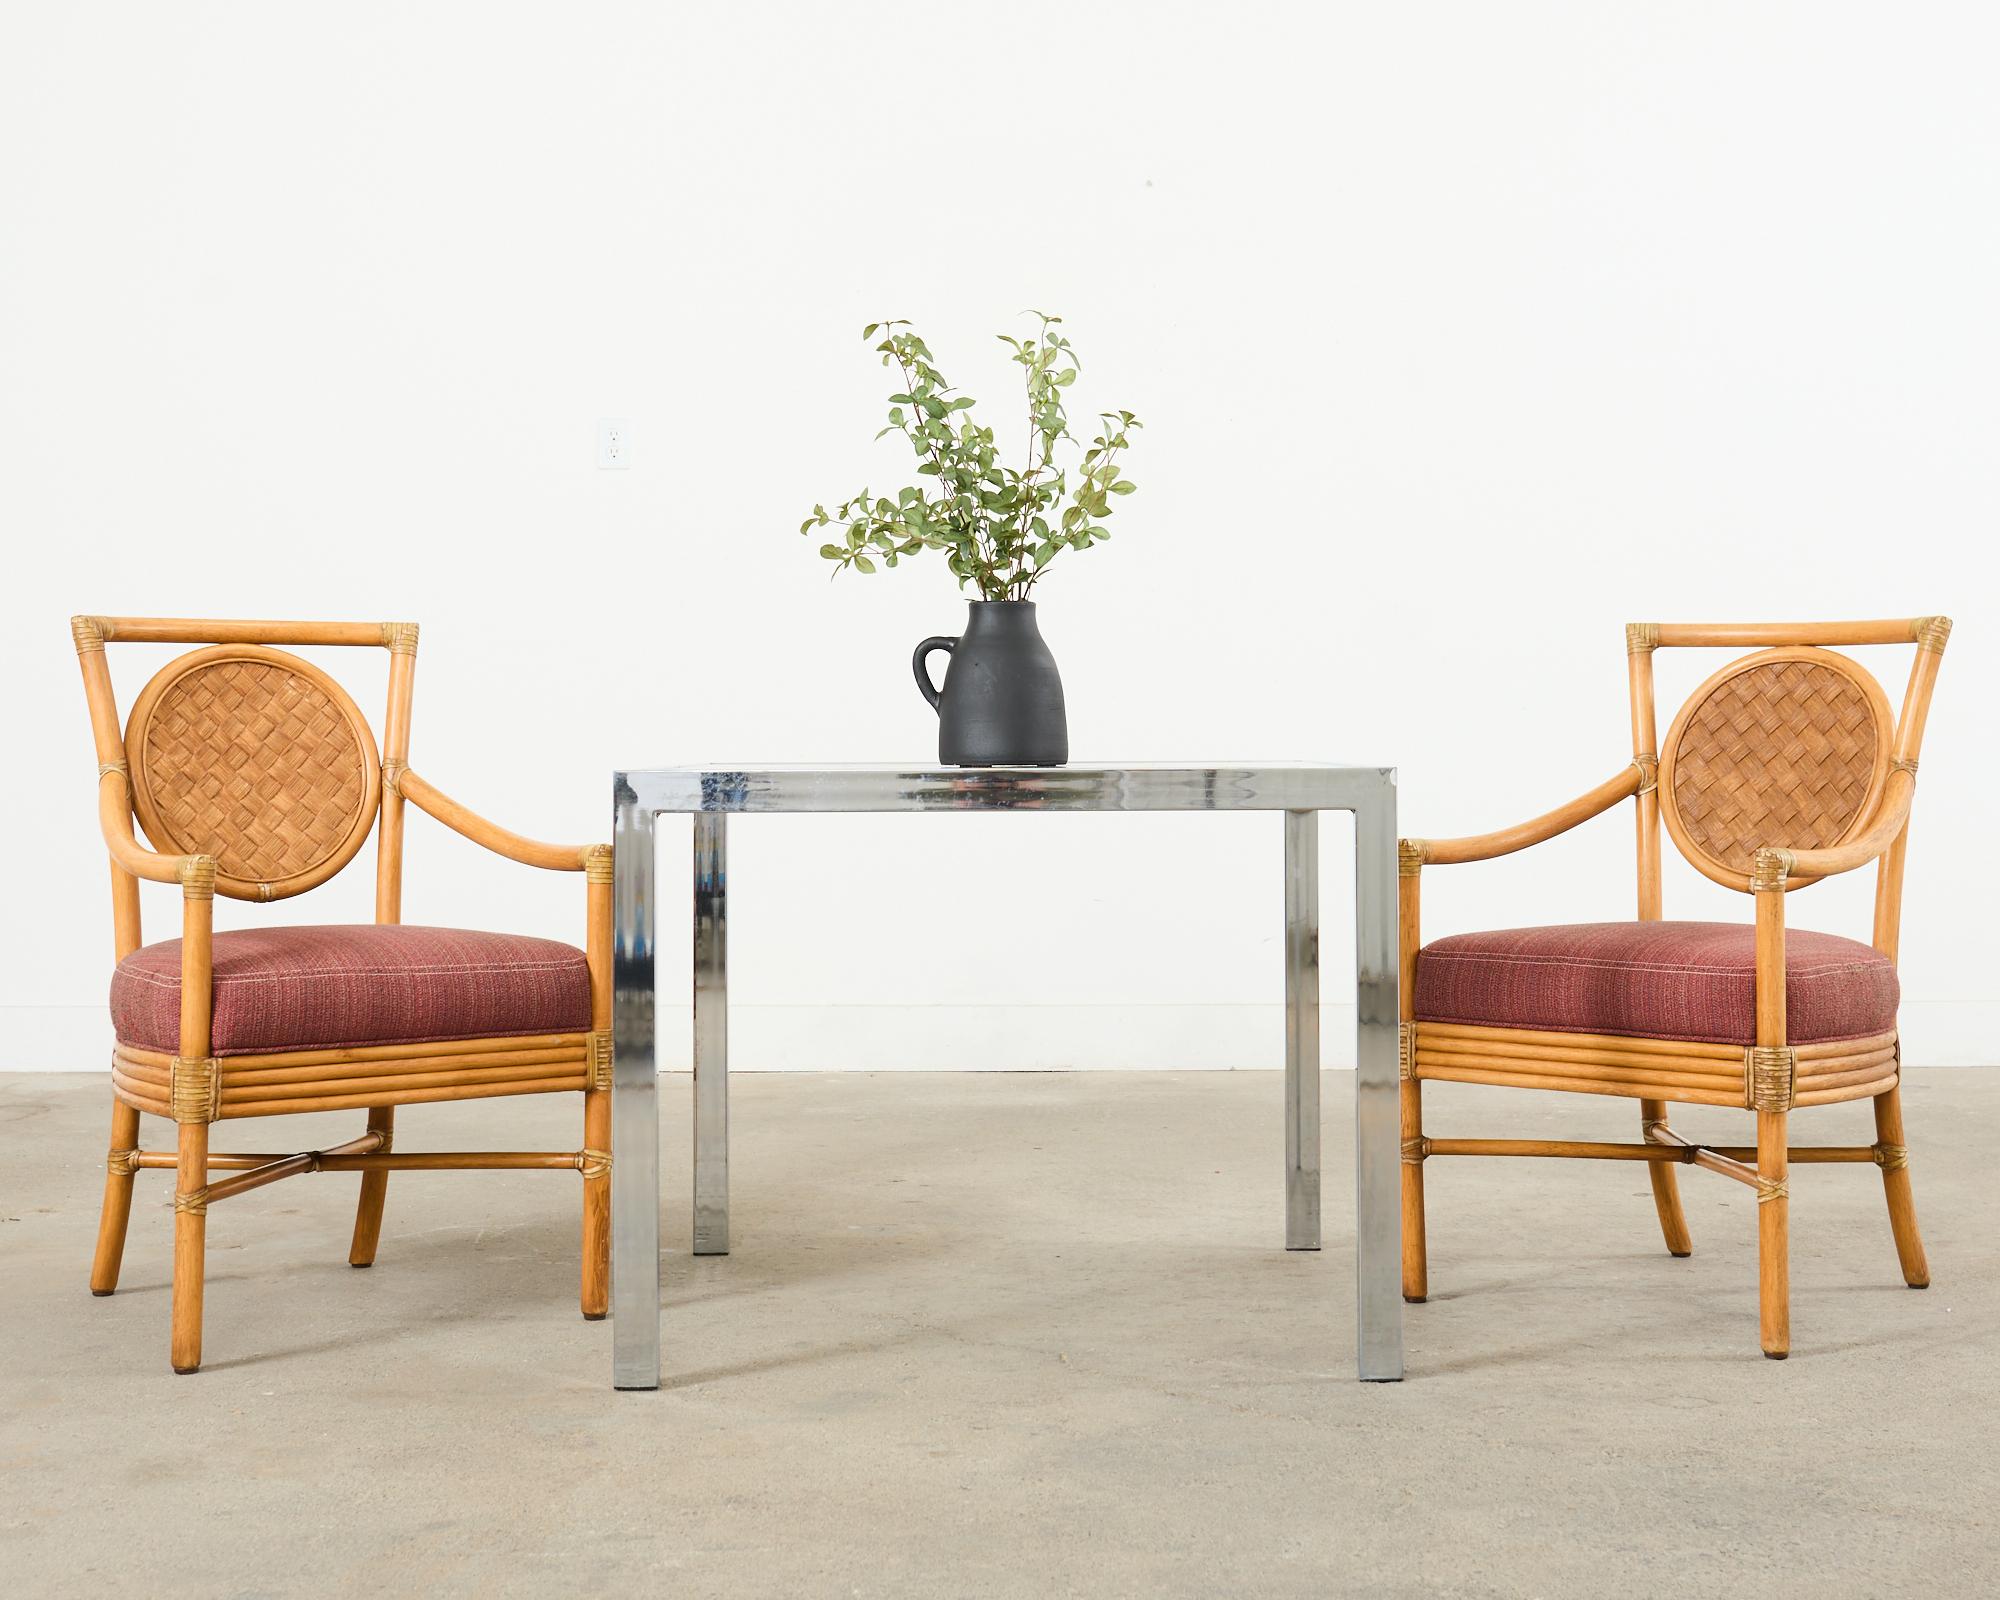 Rare set of six salon dining armchairs (model #MCM222B) designed by Orlando Diaz-Azcuy for McGuire. Made in the California coastal organic modern style with a natural finish on the rattan. The frames have a distinctive square back inset with a round